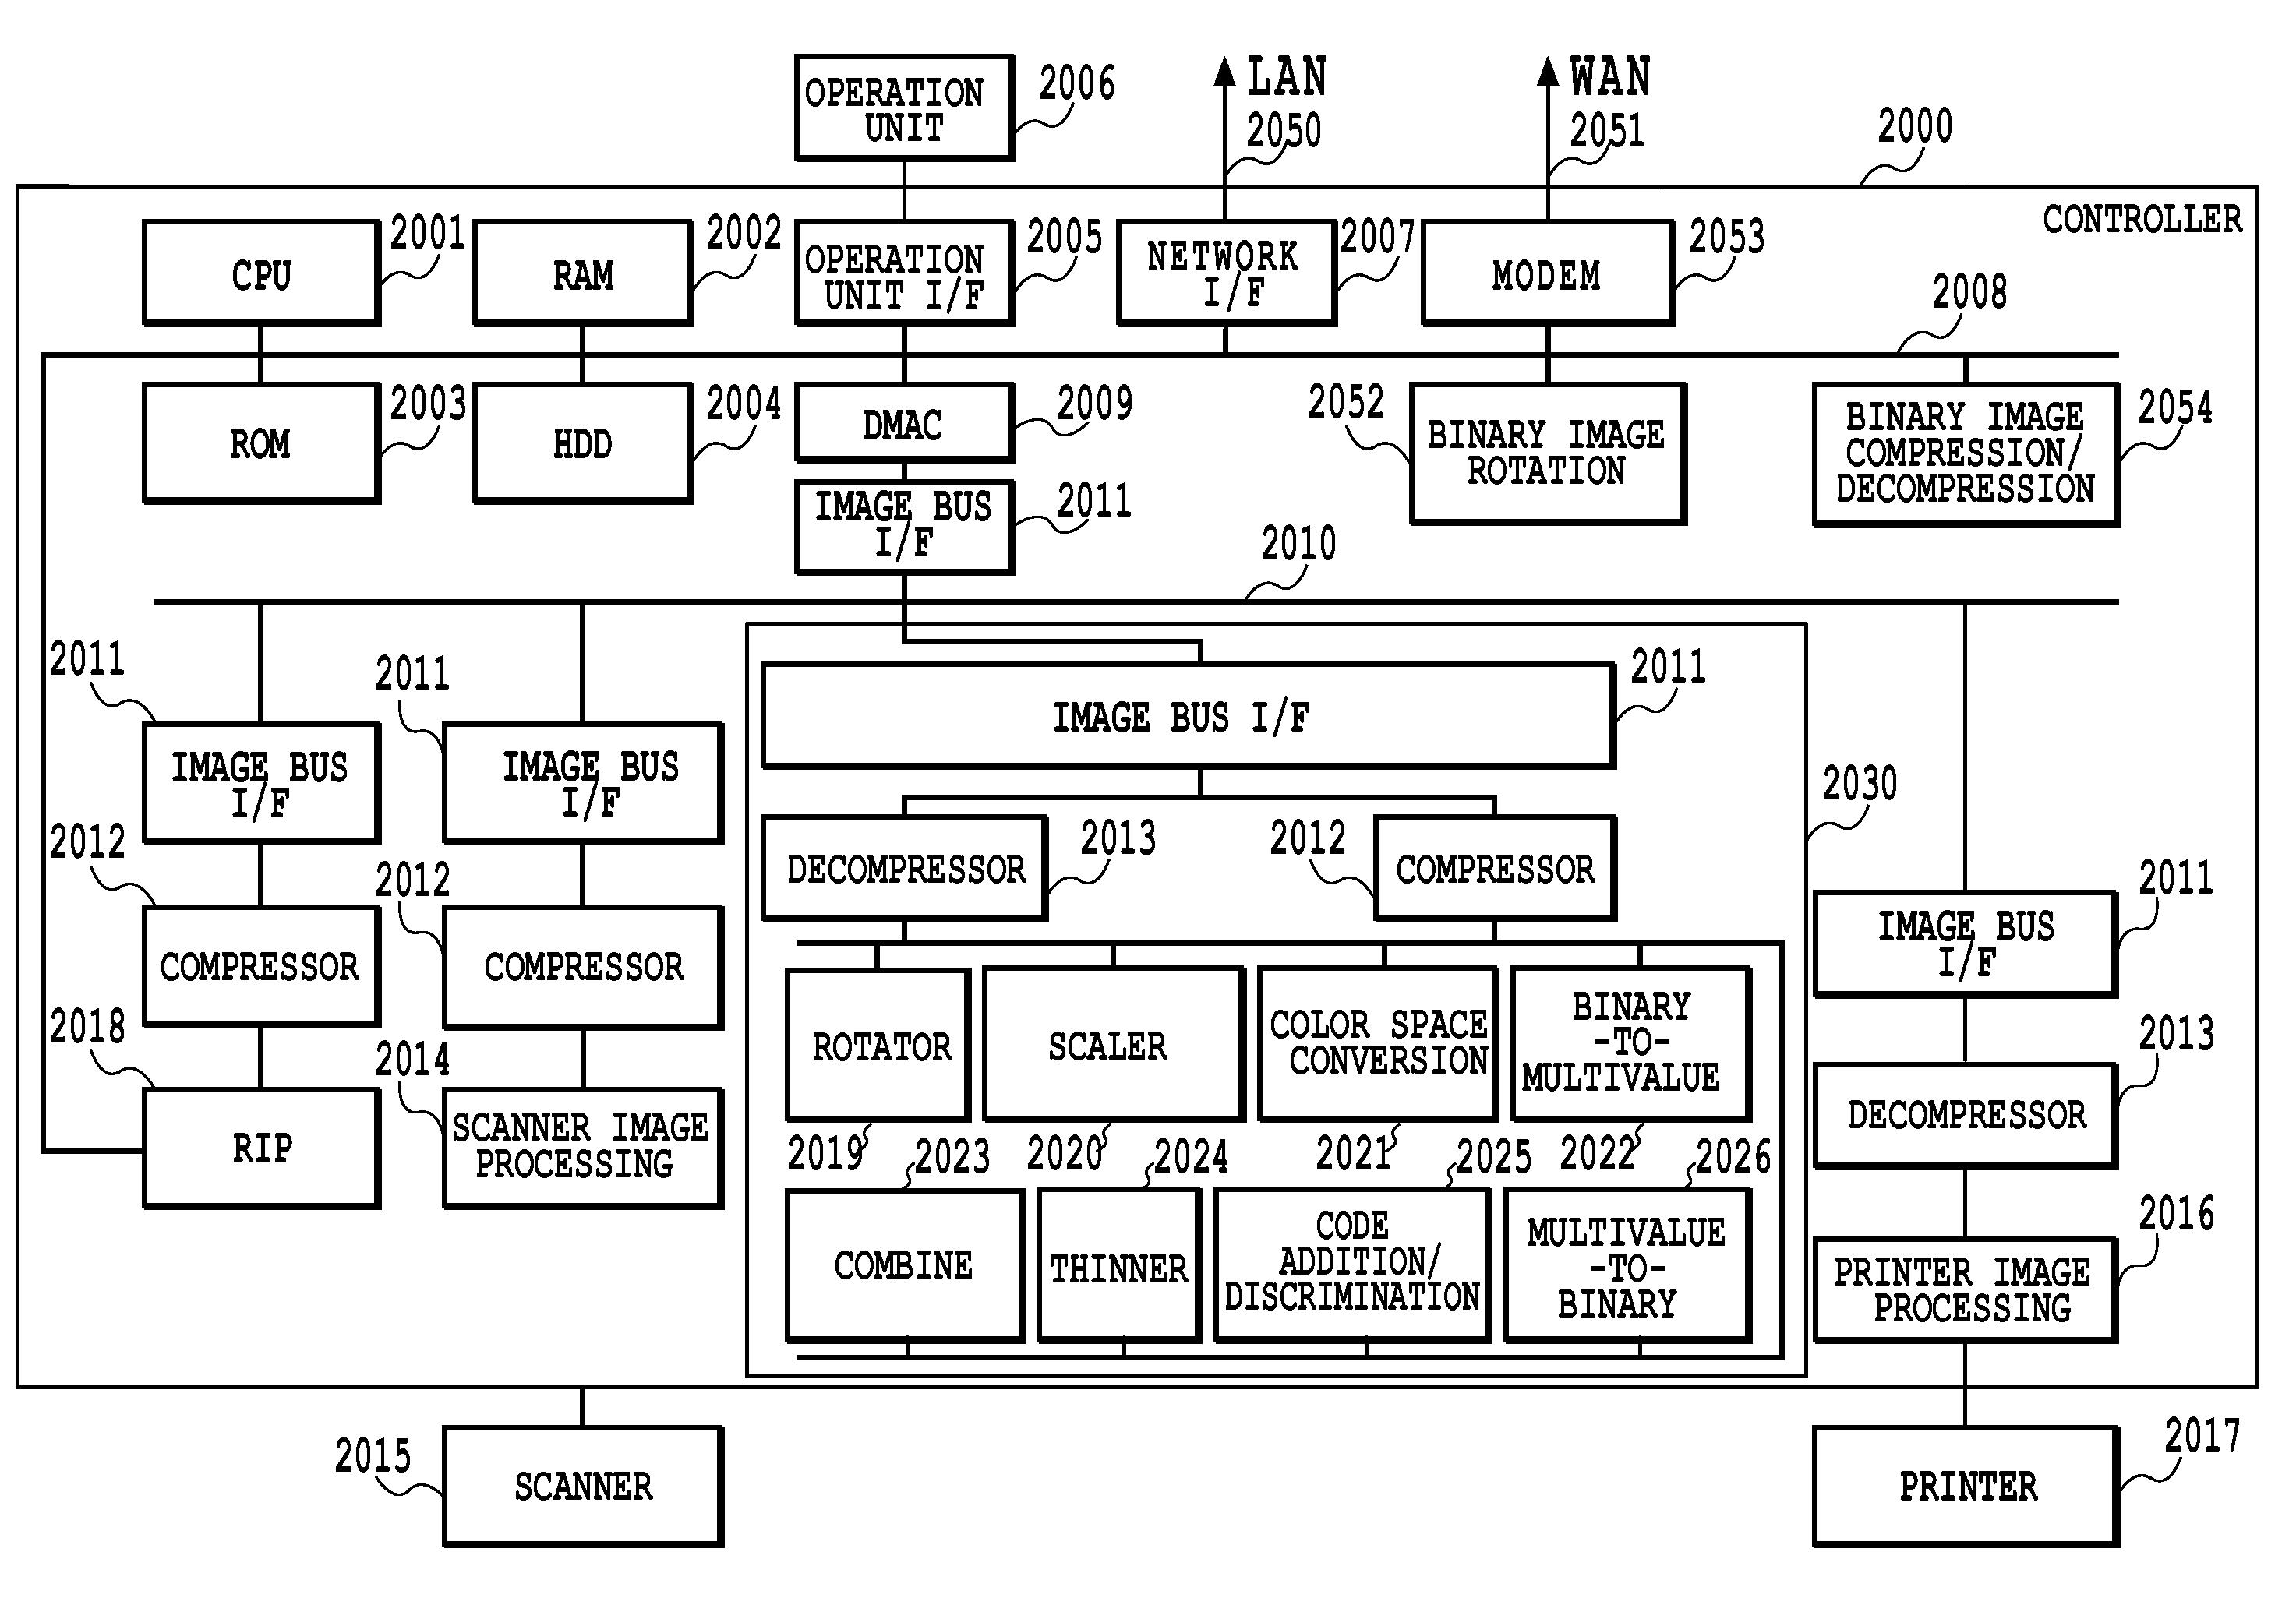 Image processing for reproducing code image from original information